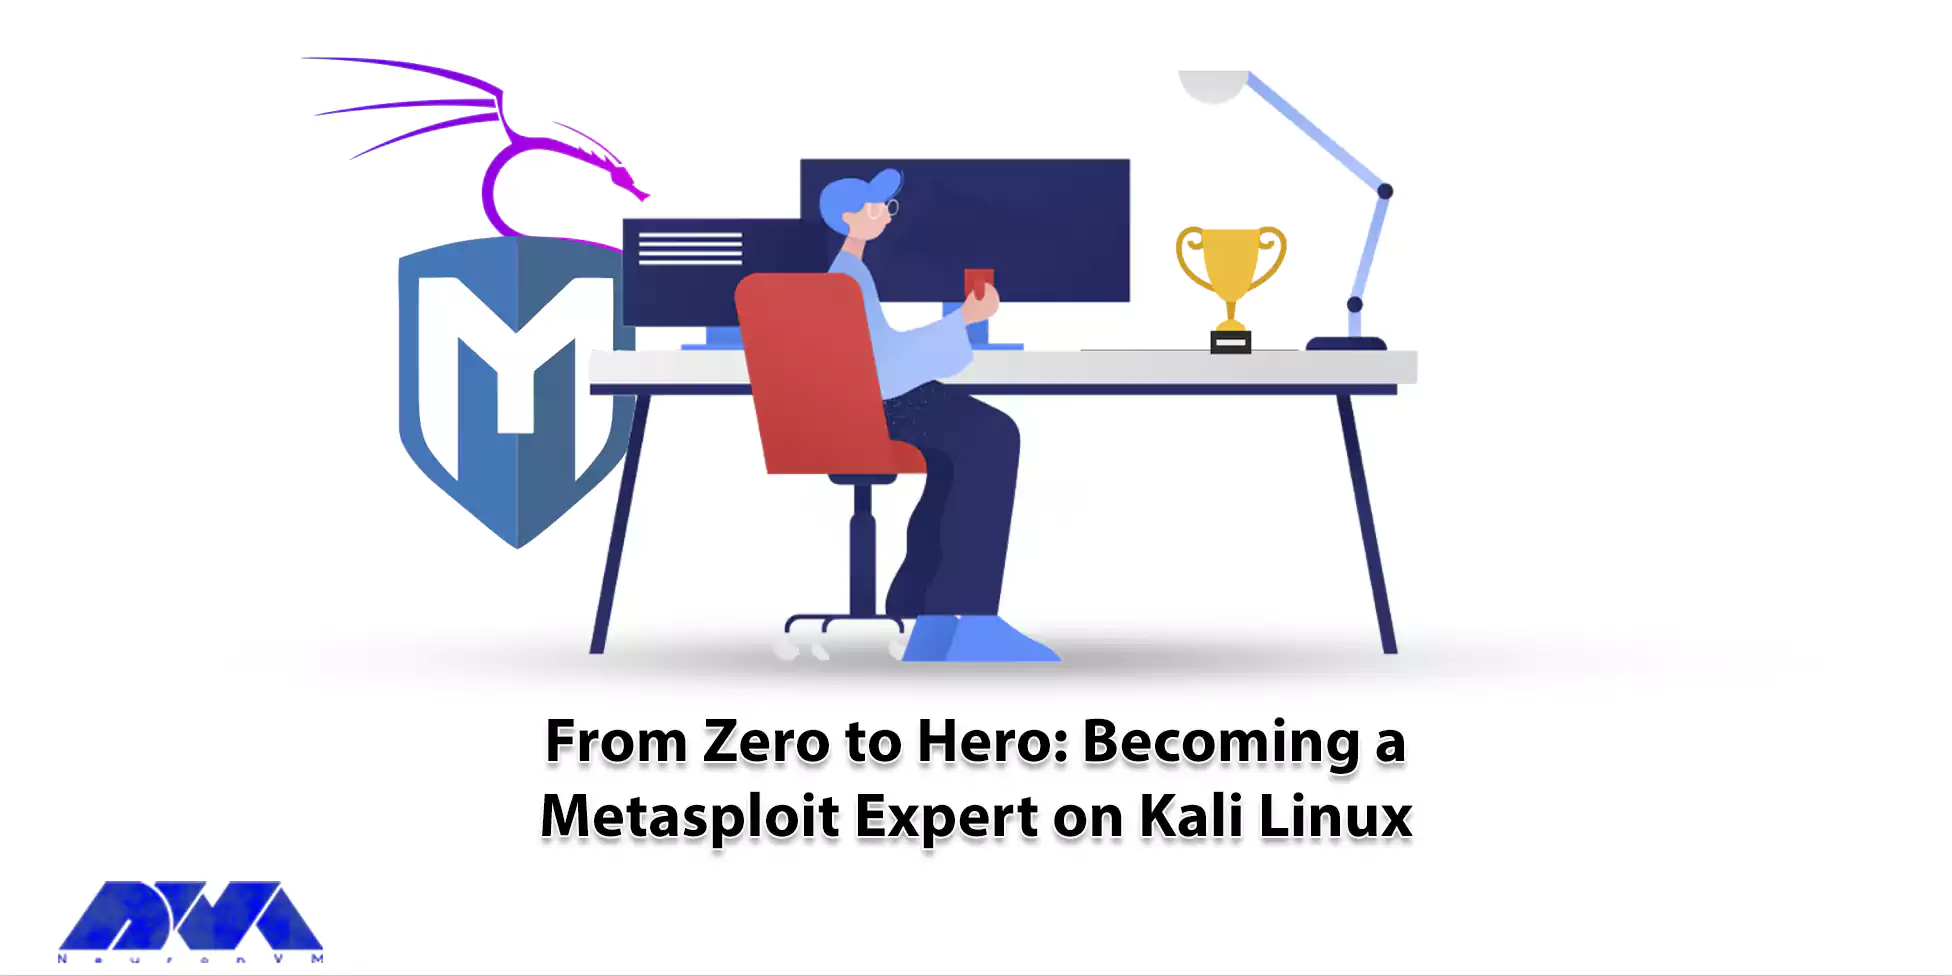 From Zero to Hero Becoming a Metasploit Expert on Kali Linux